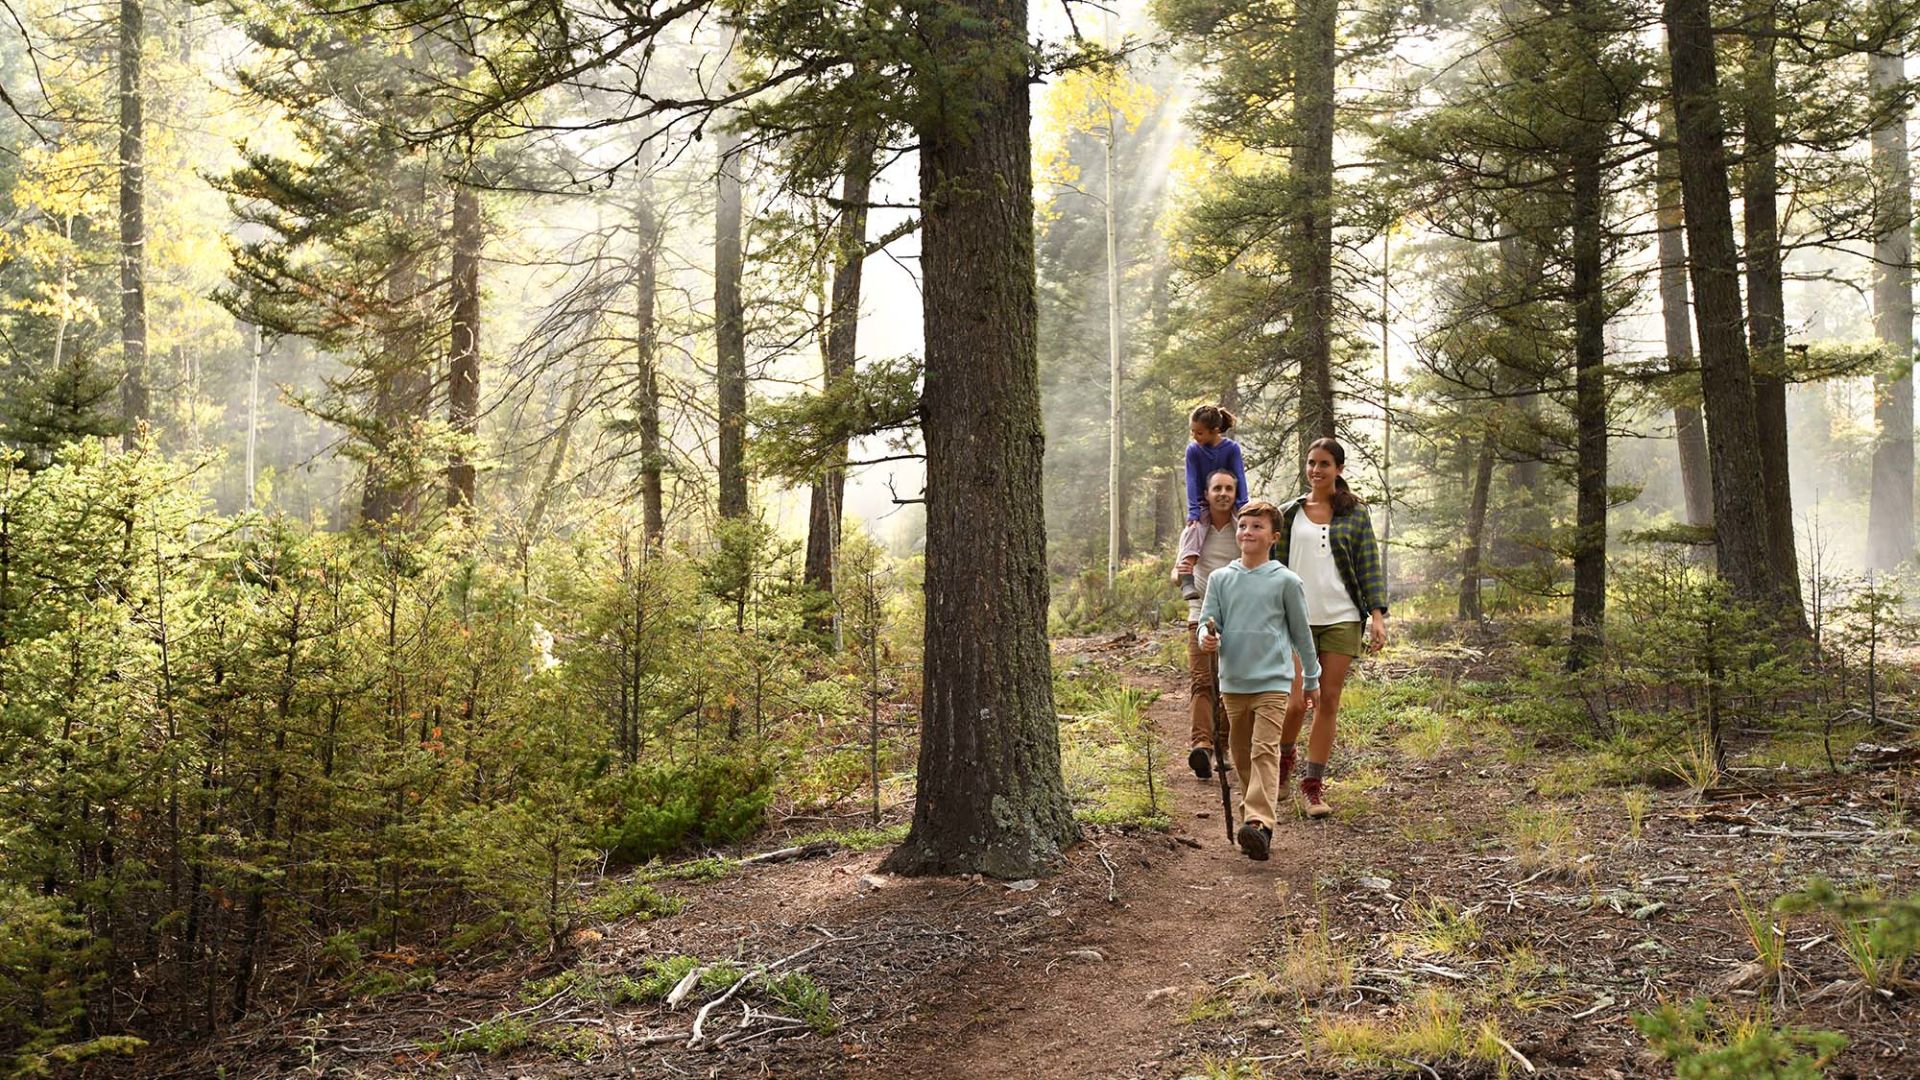 A Group Of People Walking Through A Forest